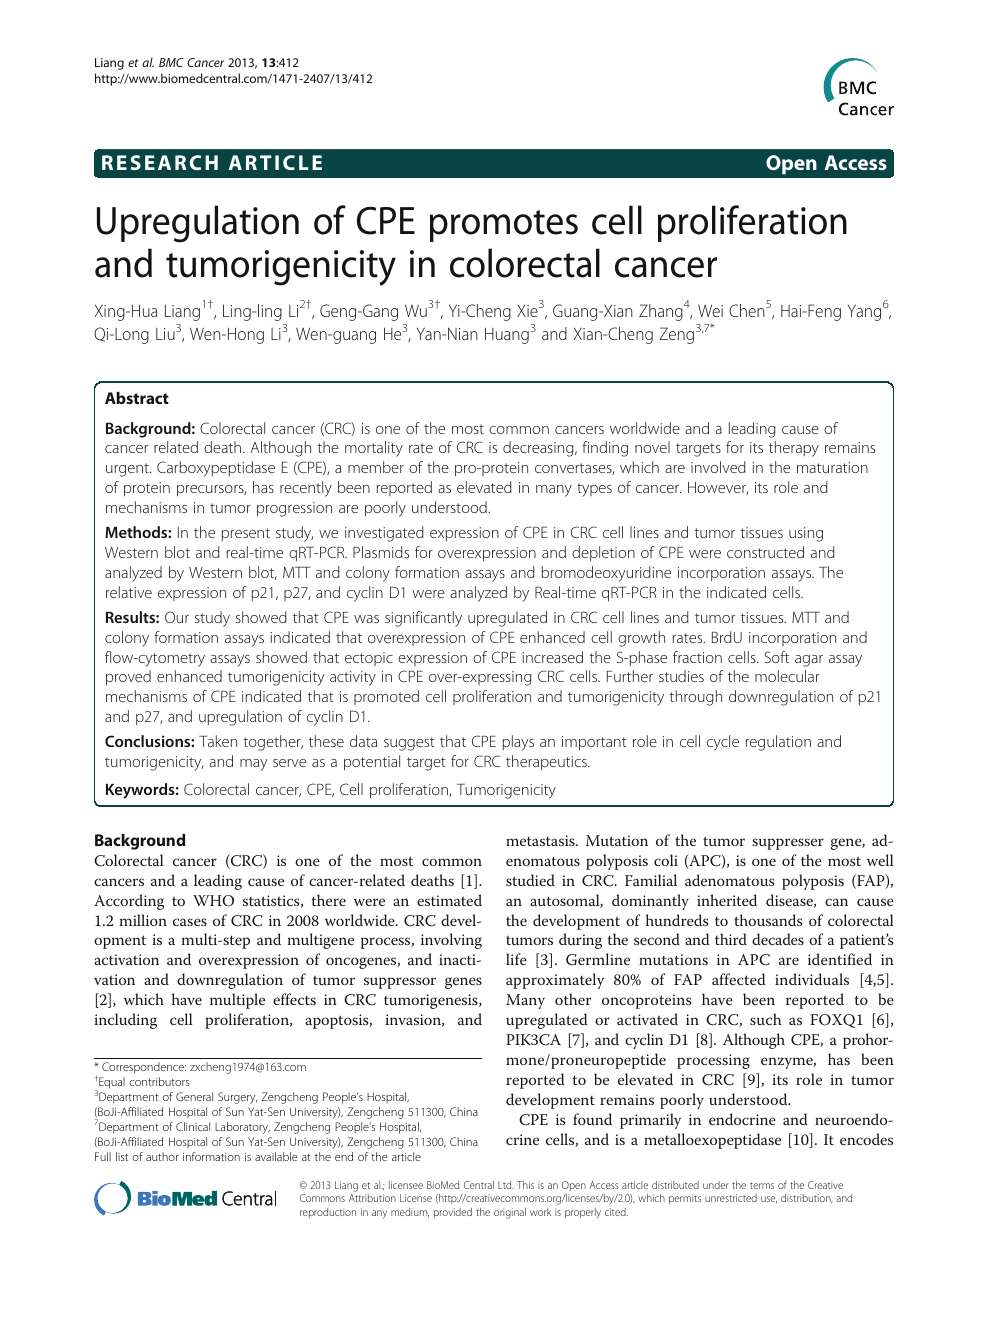 Upregulation Of Cpe Promotes Cell Proliferation And - 